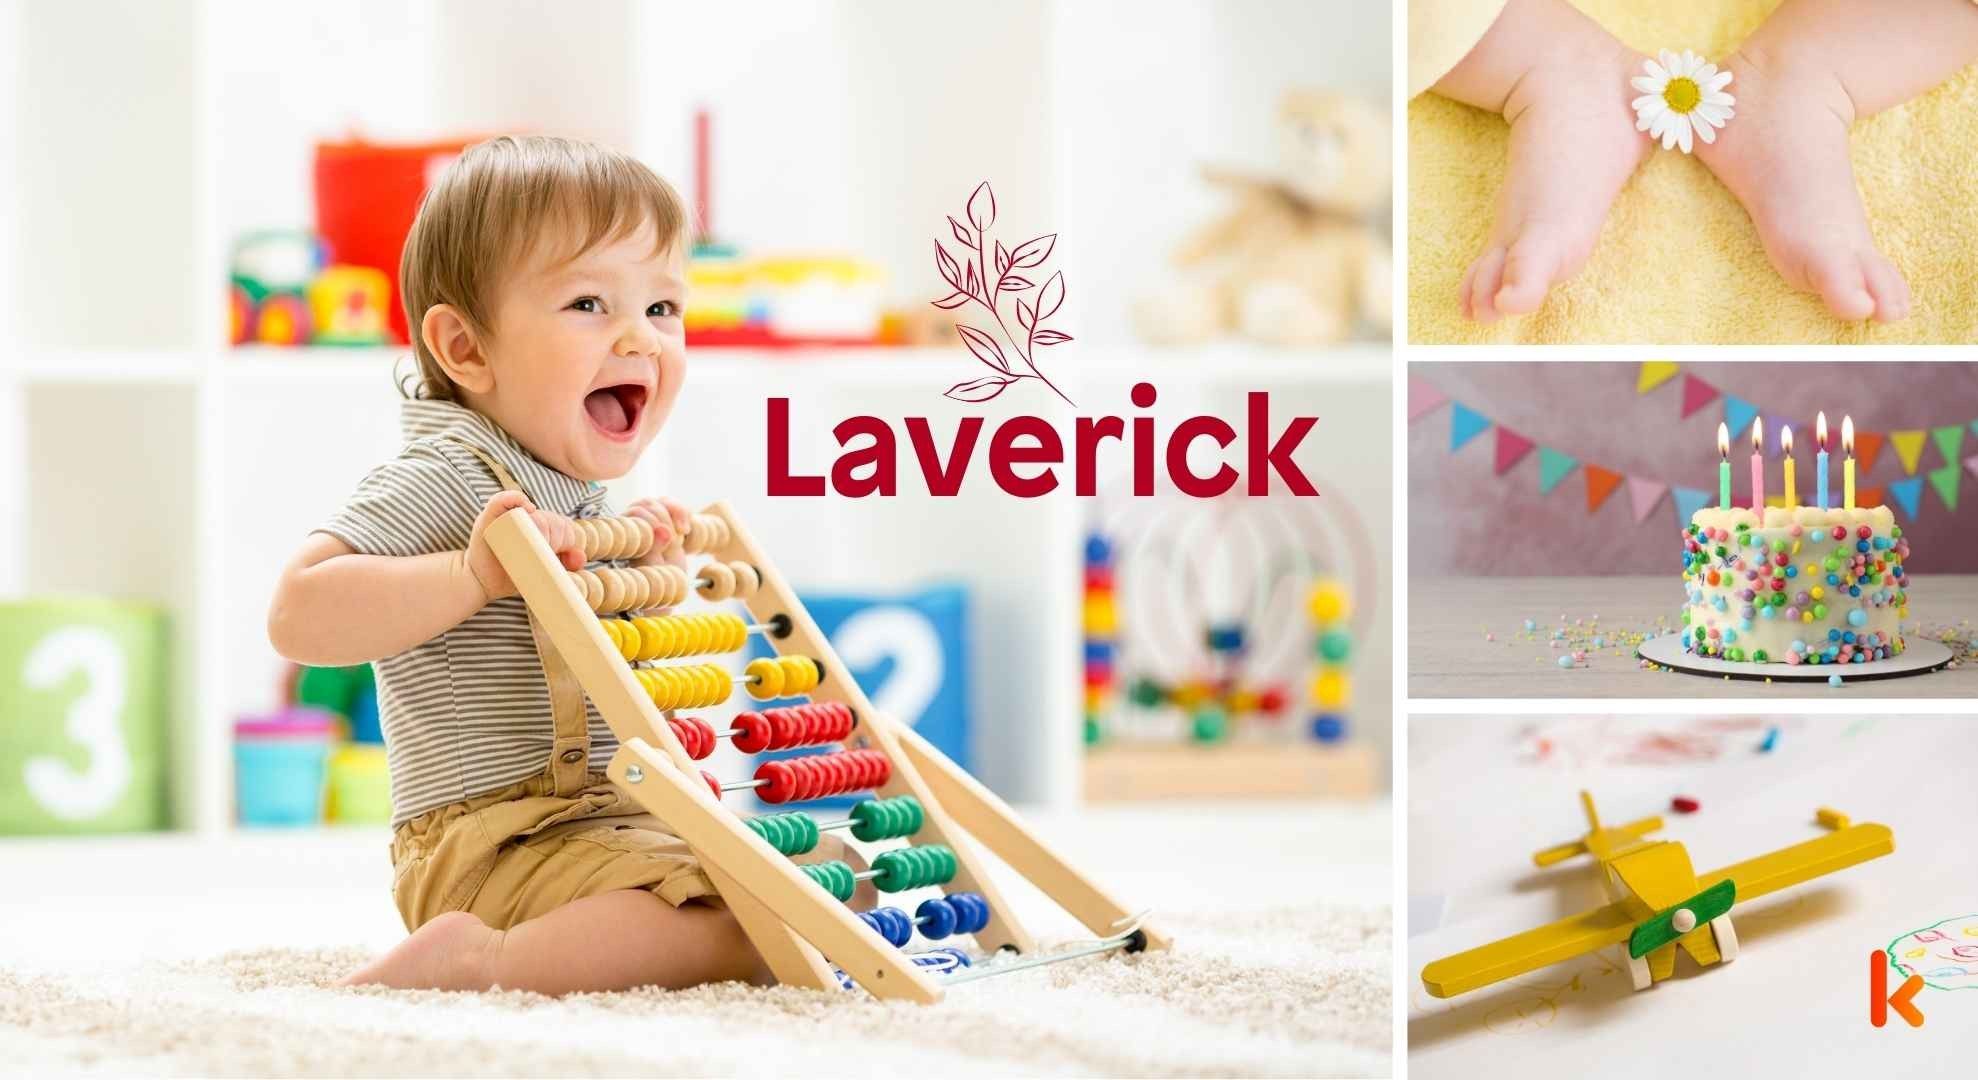 Meaning of the name Laverick